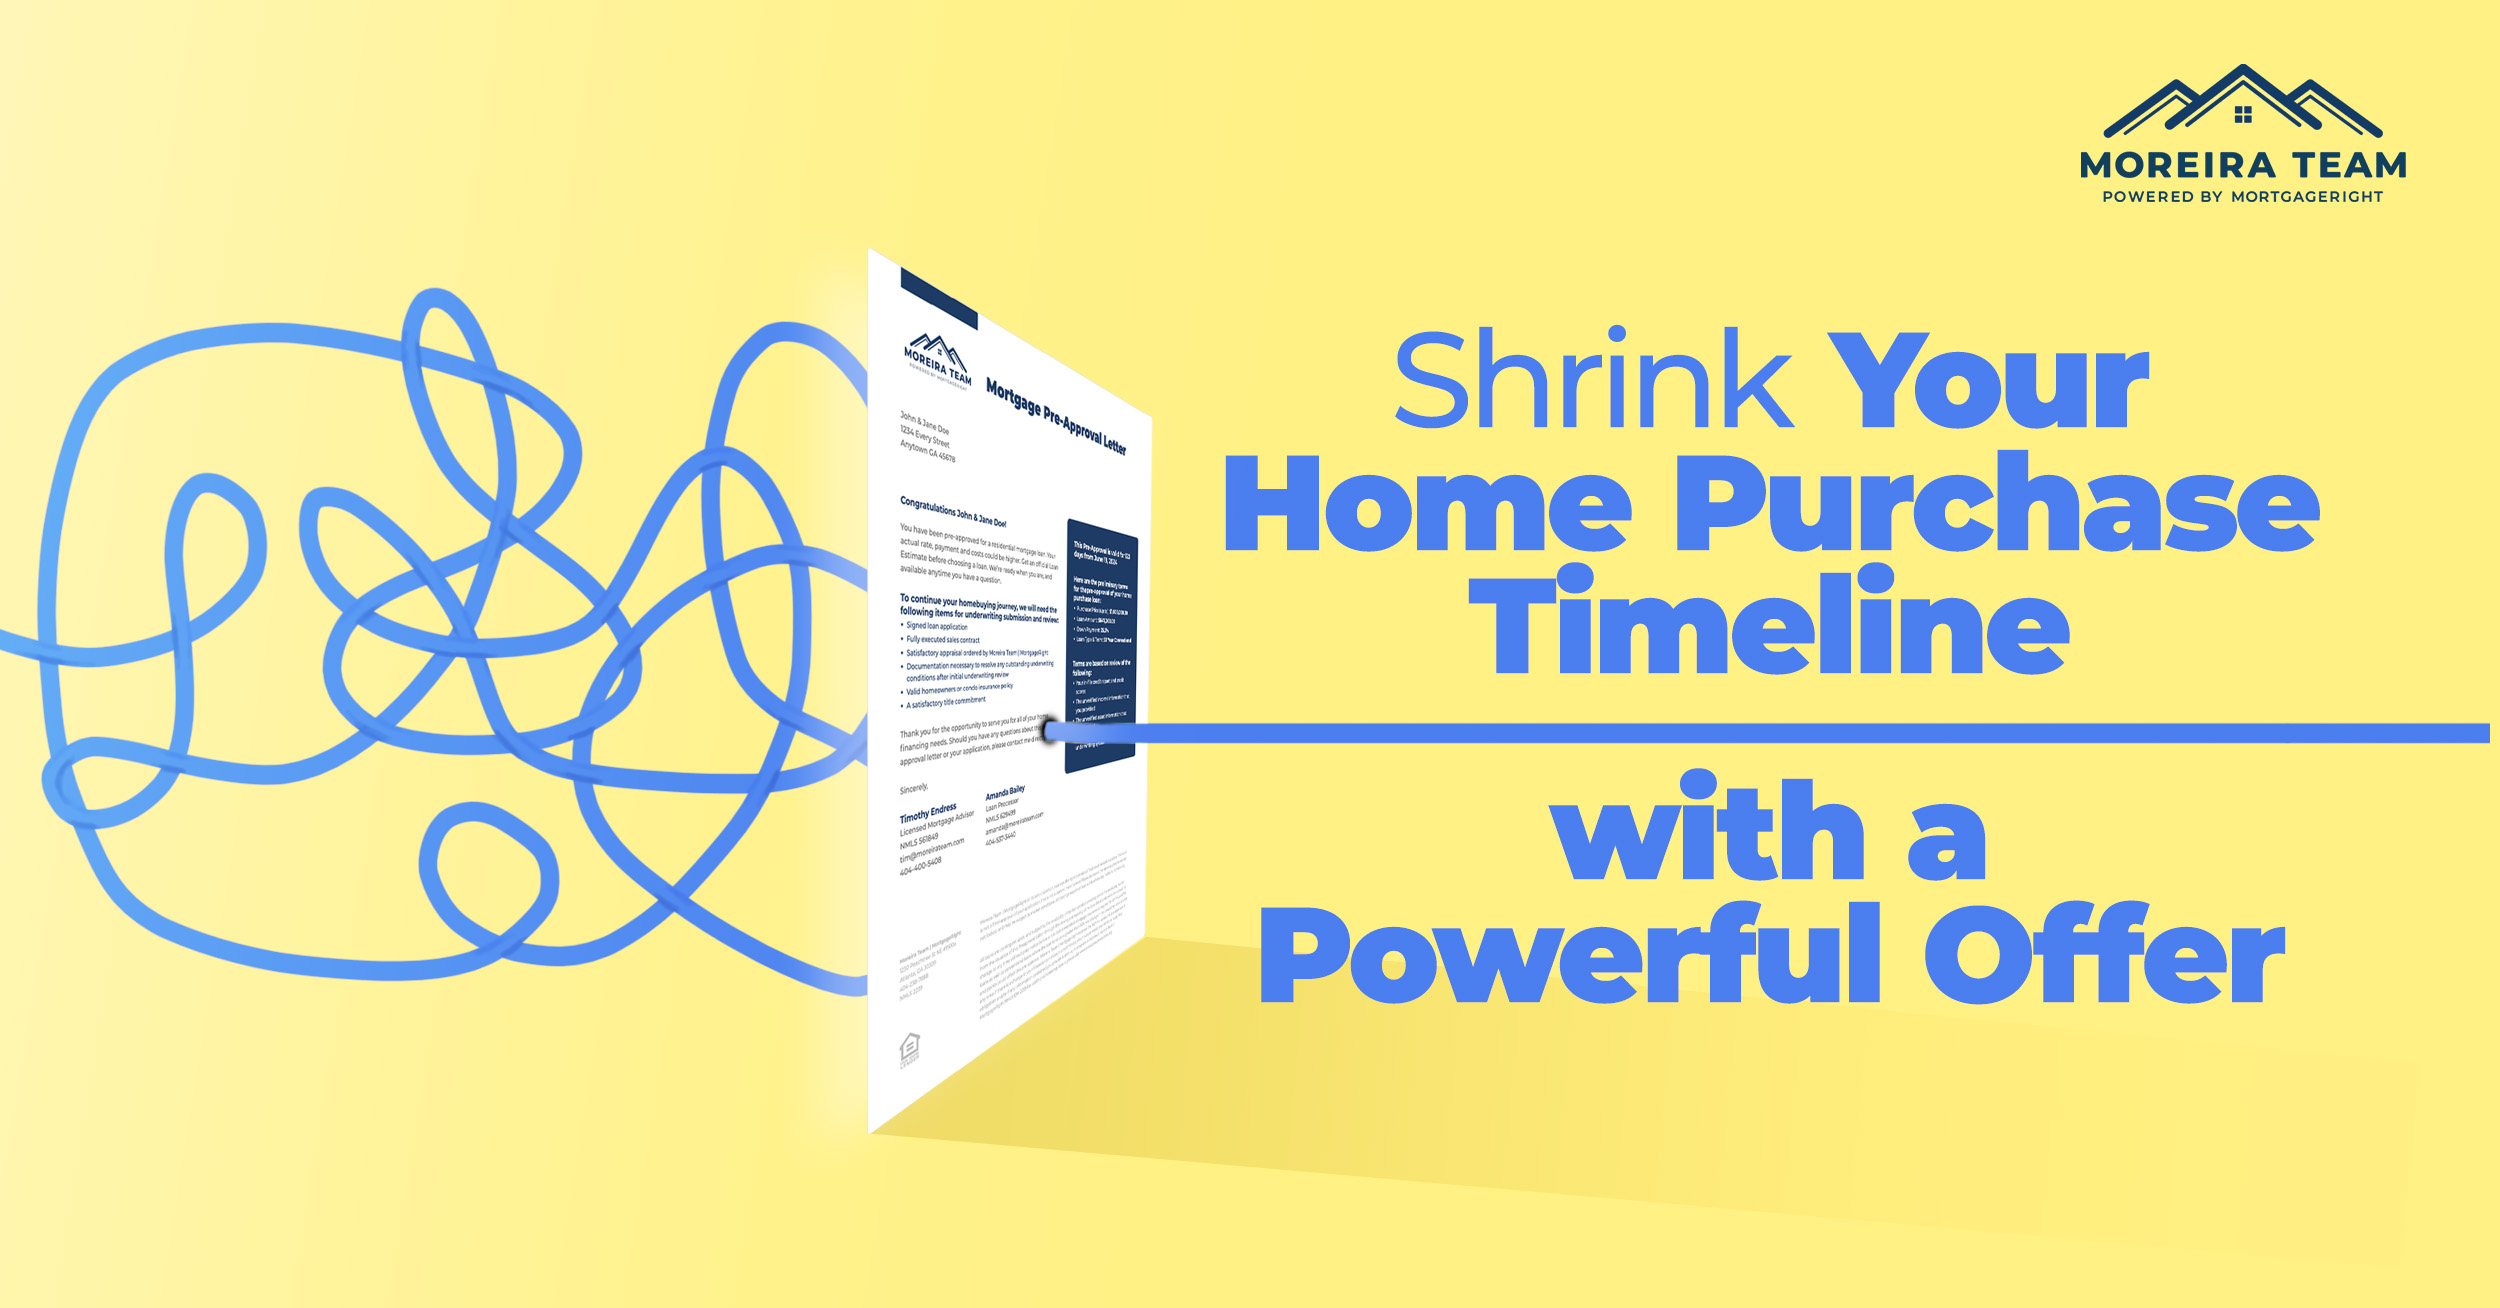 Shrink Your Home Purchase Timeline with a Powerful Offer